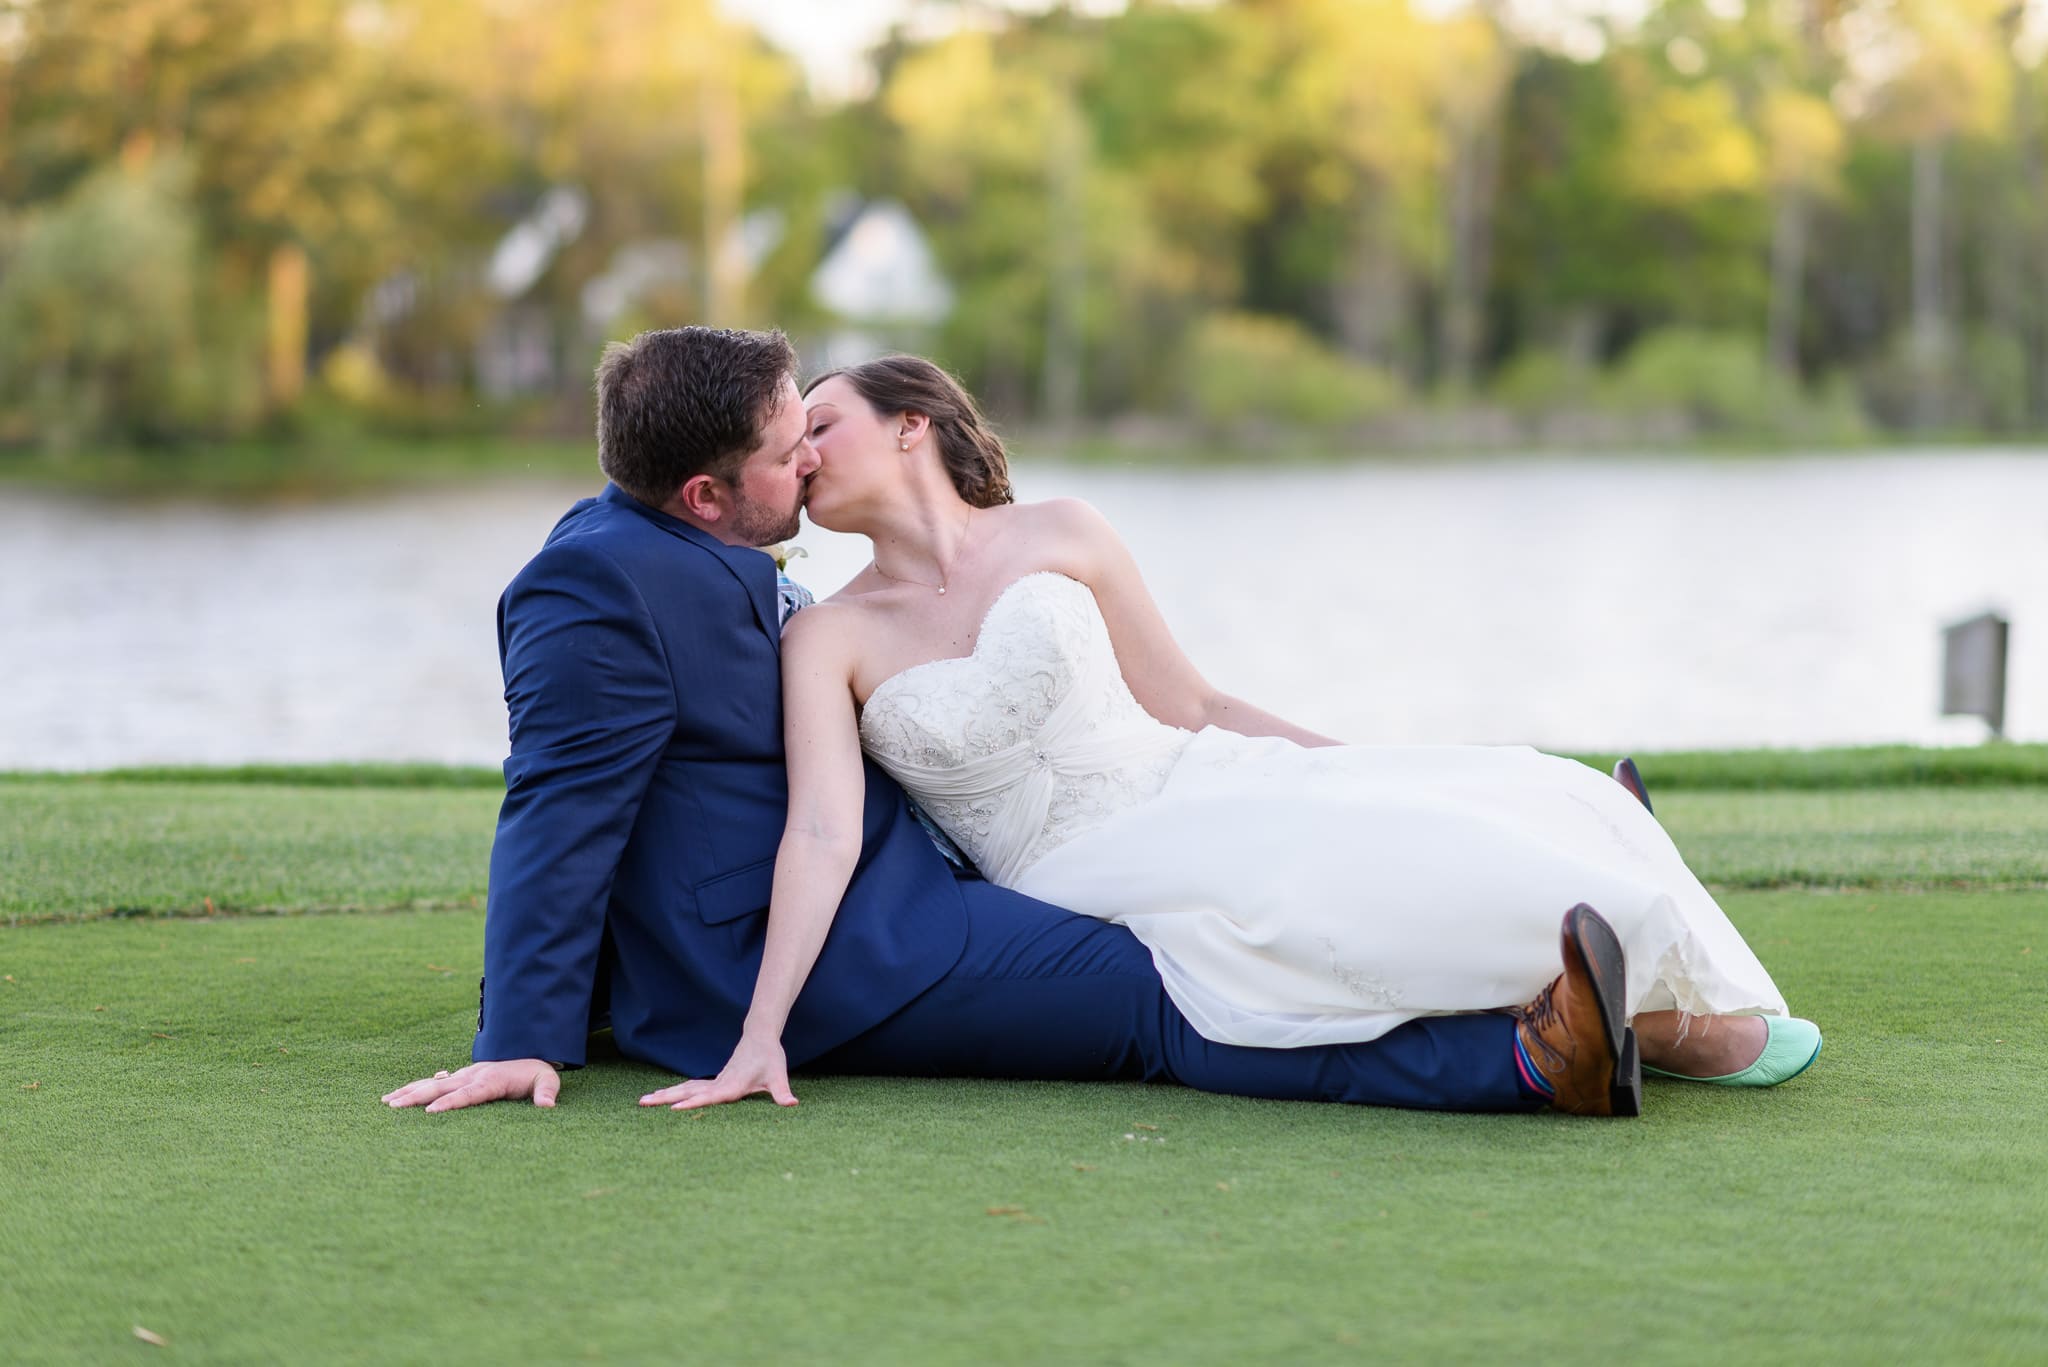 Portraits of the bride and groom on the golf course at sunset - Pawleys Plantation